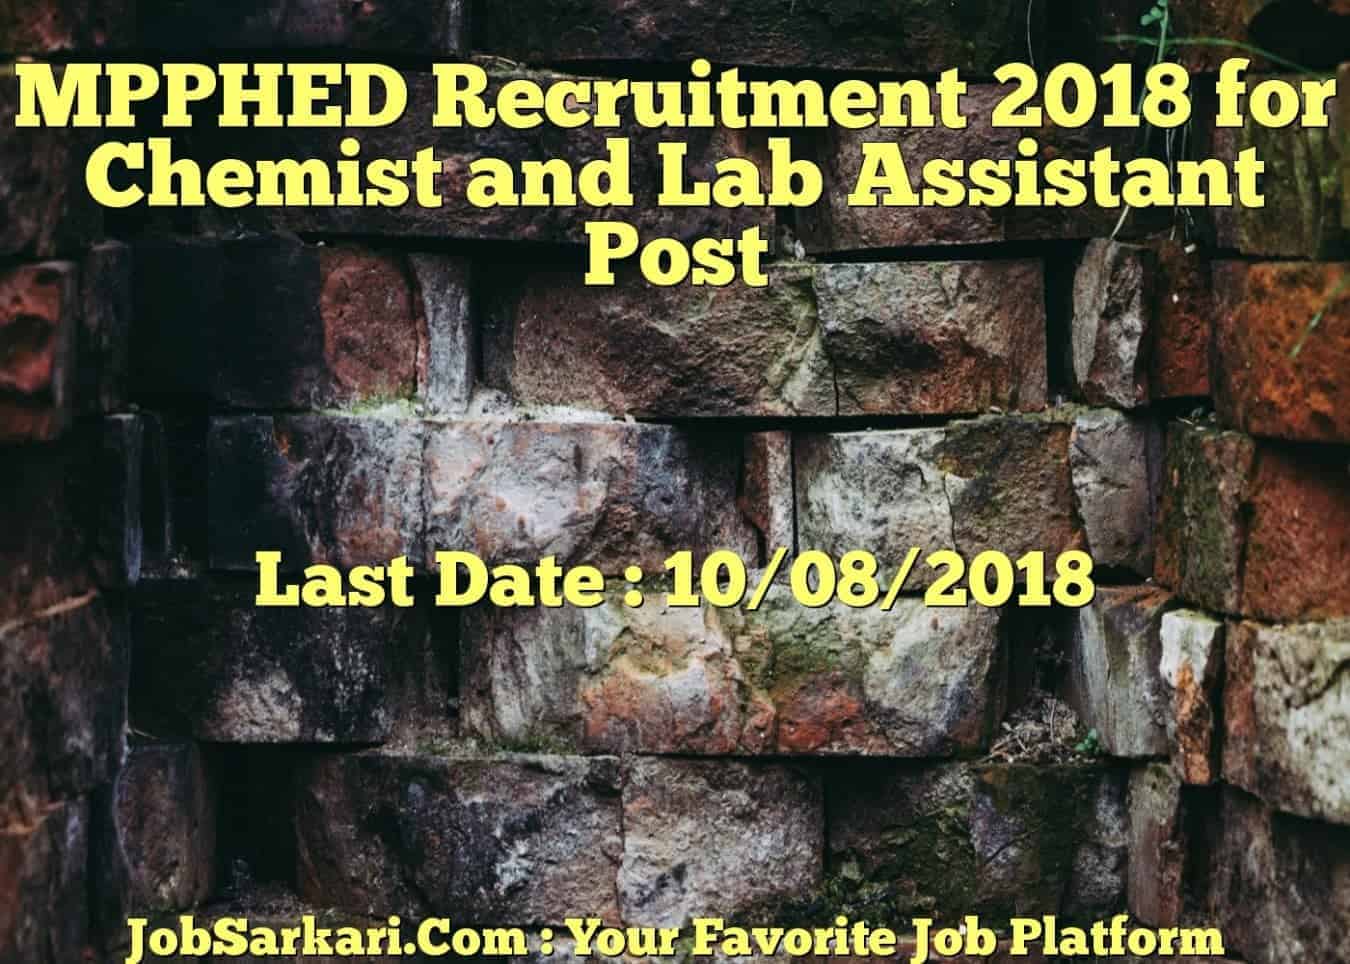 MPPHED Recruitment 2018 for Chemist and Lab Assistant Post